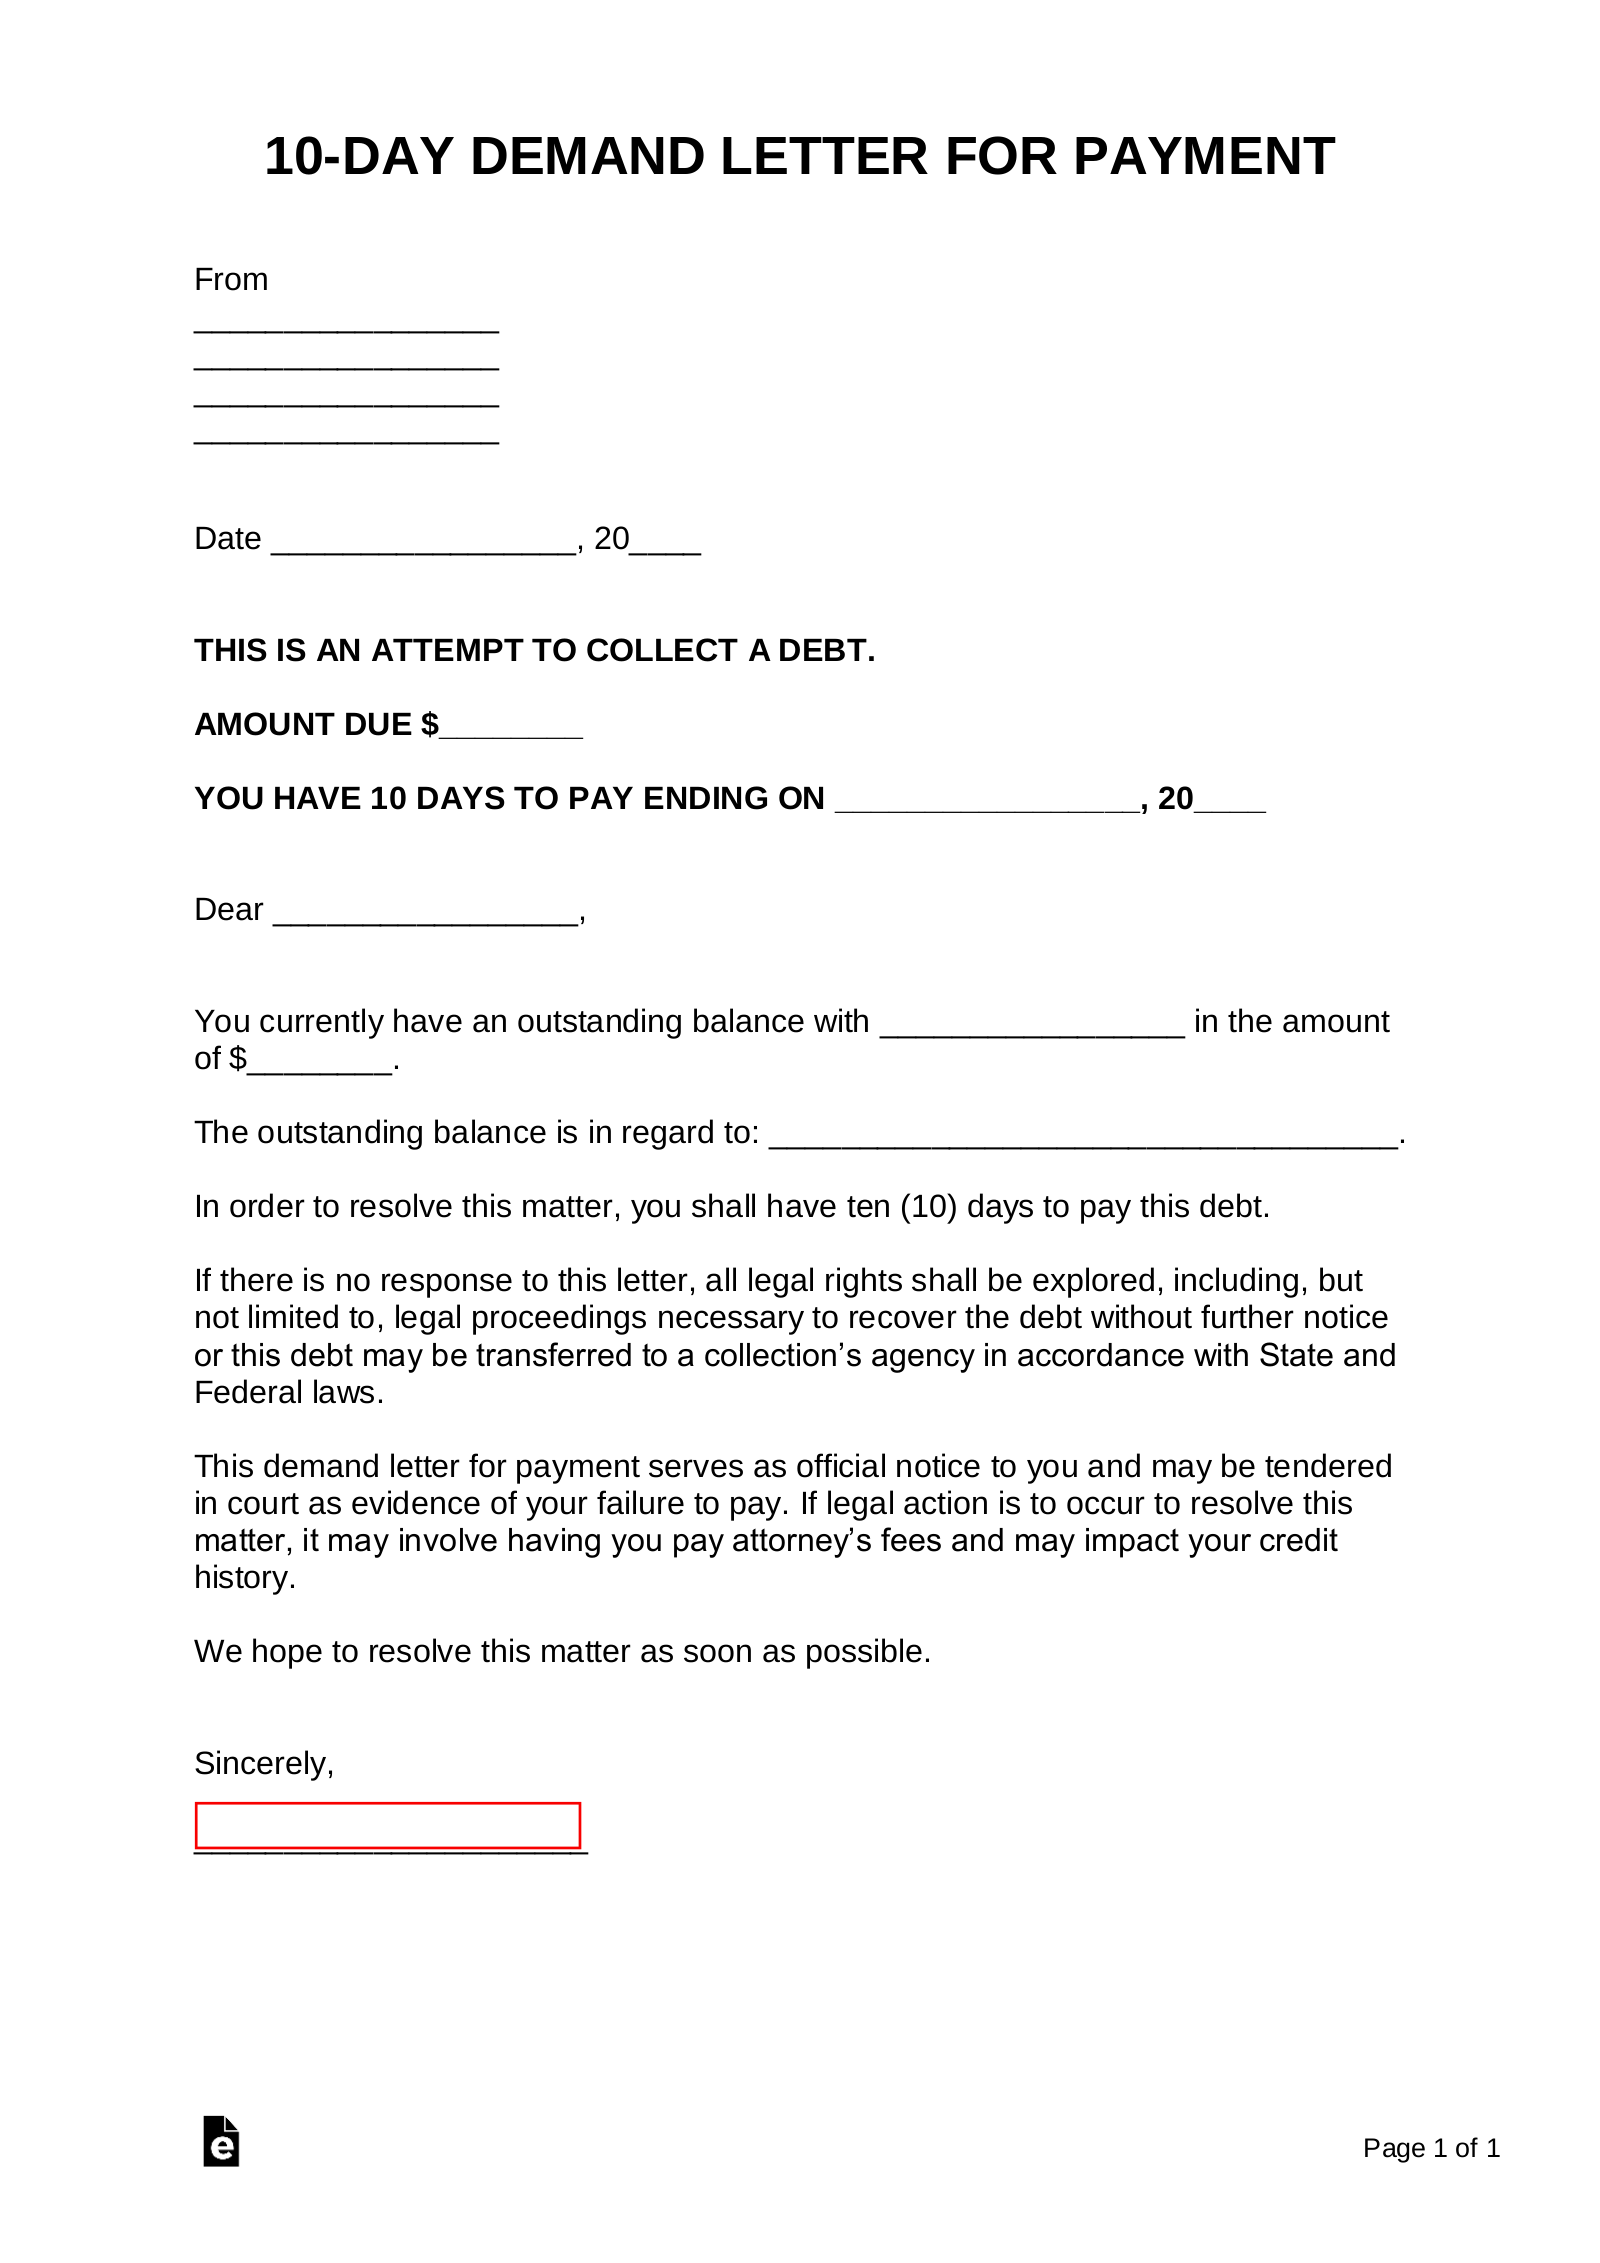 Sample Demand Letter For Return Of Personal Property from eforms.com